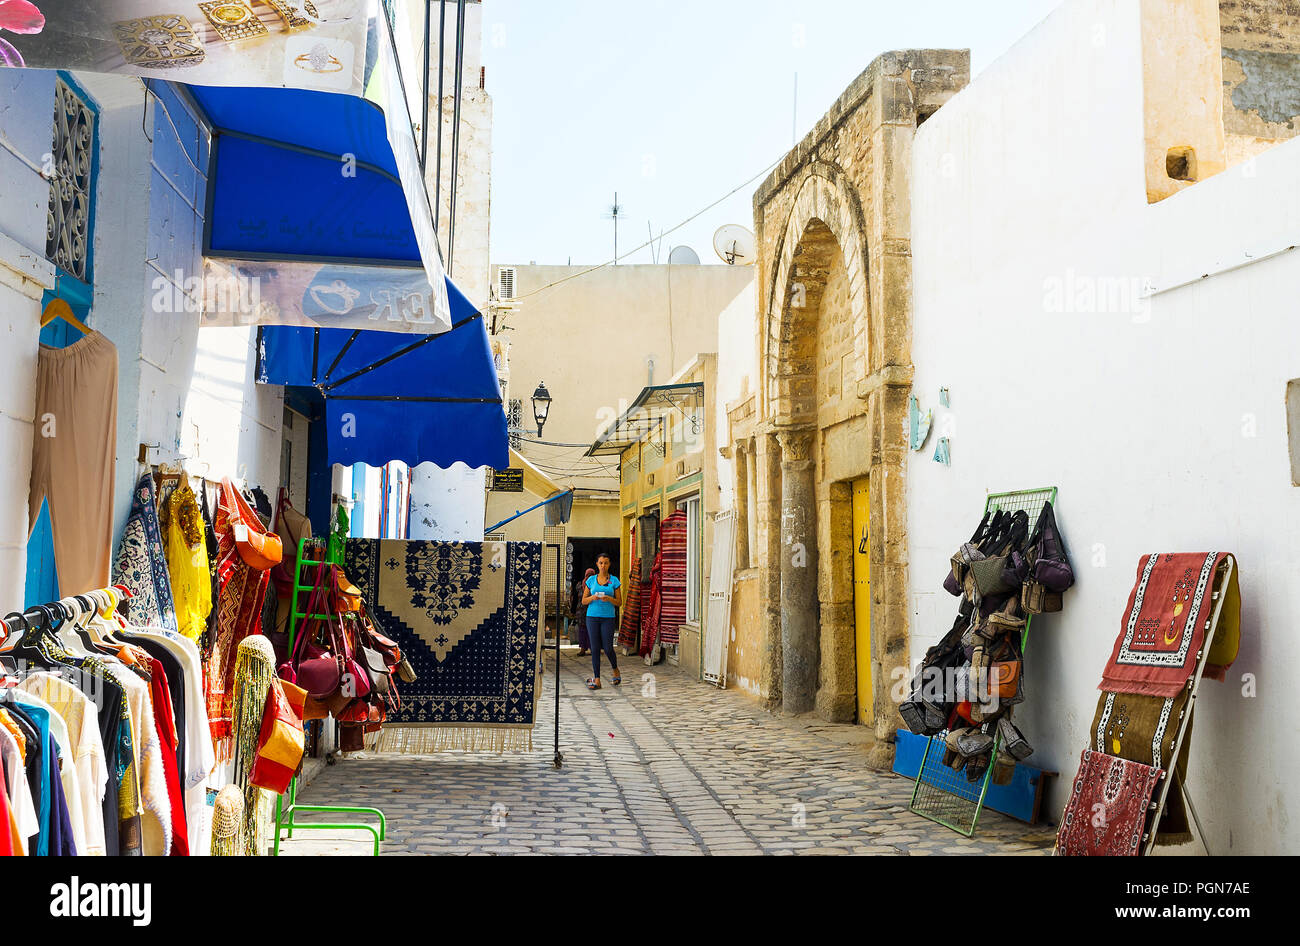 SOUSSE, TUNISIA - AUGUST 28, 2015: The clothes and rug stores around the medieval gateway of Zaouia Zakkar mosque in Medina, on August 28 in Sousse. Stock Photo